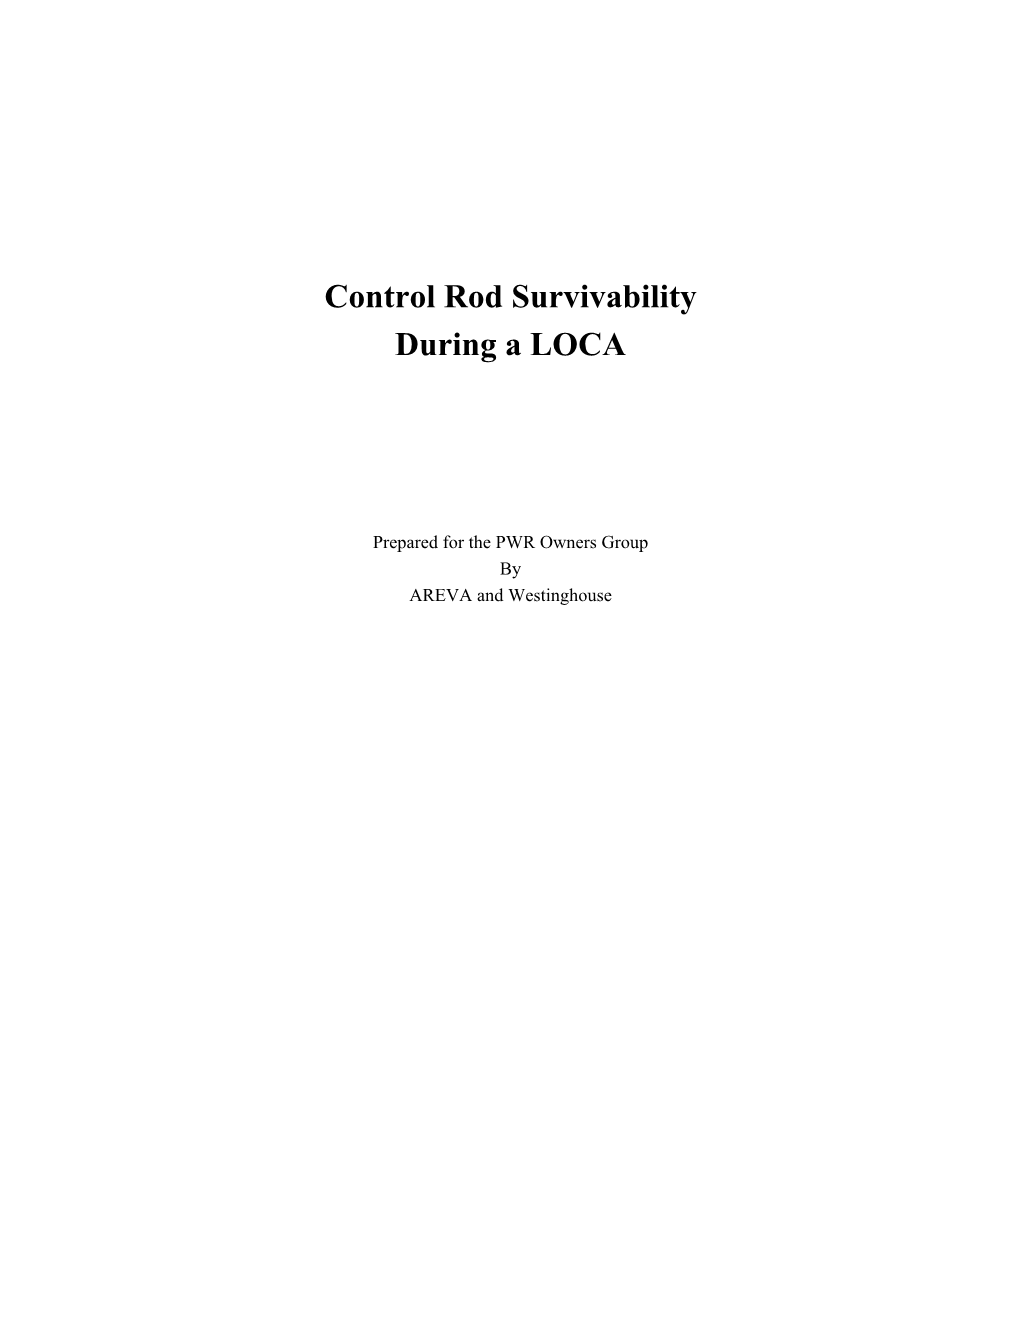 Survivability of Ag-In-Cd Control Rods During a Design Basis LOCA